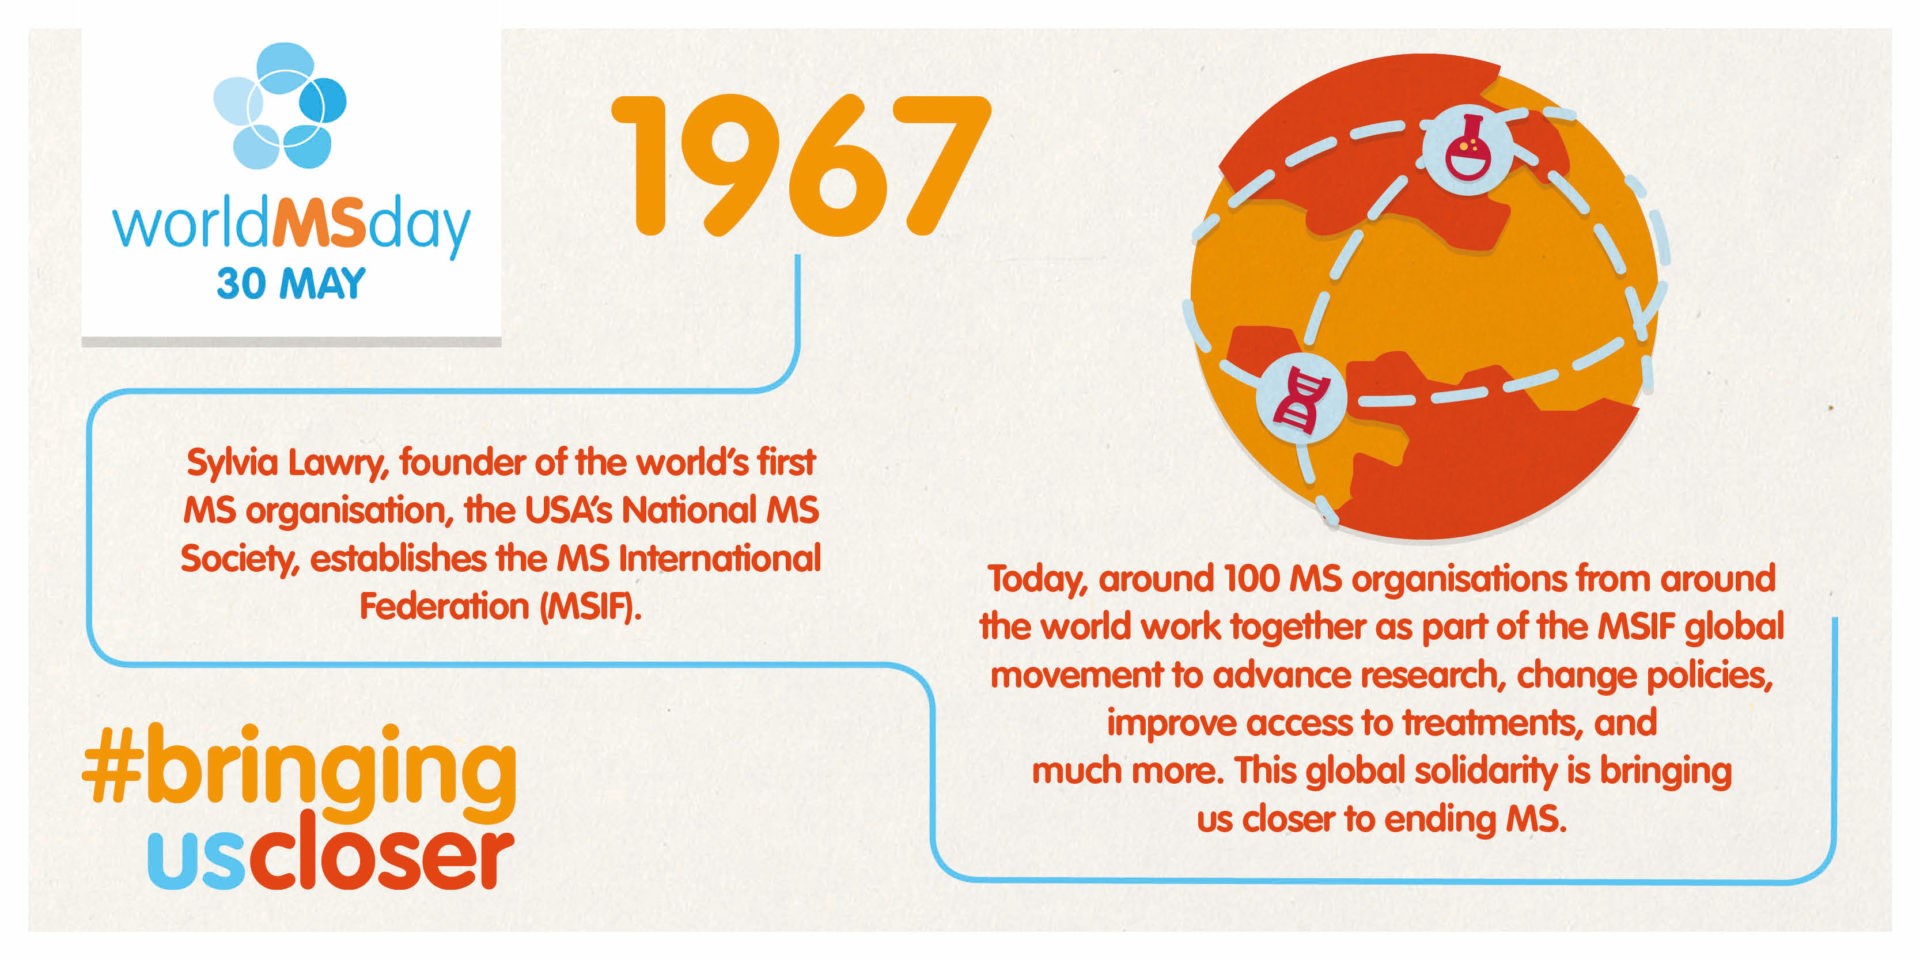 1967 Sylvia Lawry, founder of the world’s first MS organisation establishes the MS International Federation 